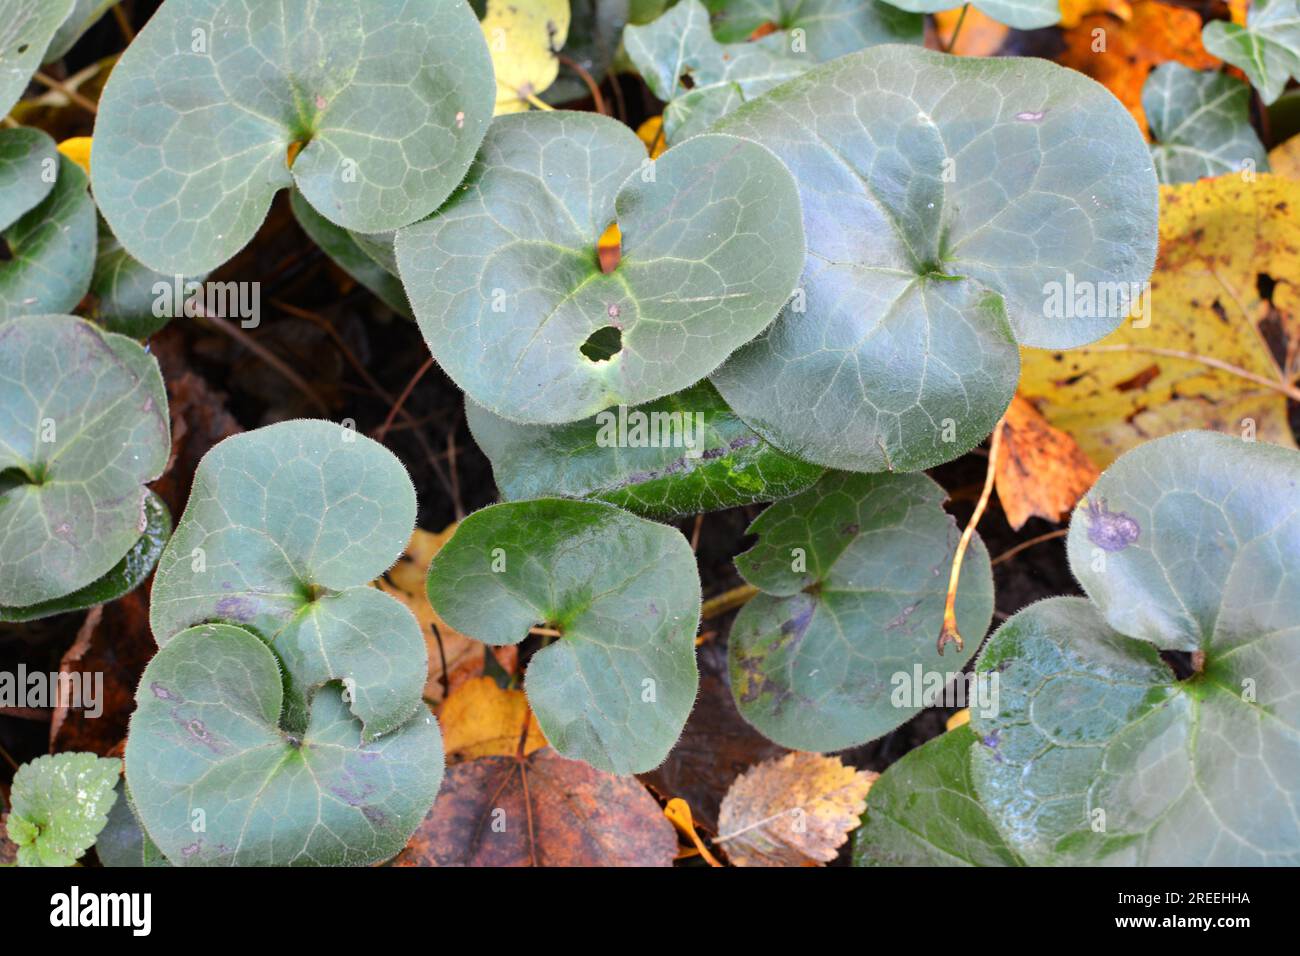 Asarum europaeum grows in the forest in the wild Stock Photo